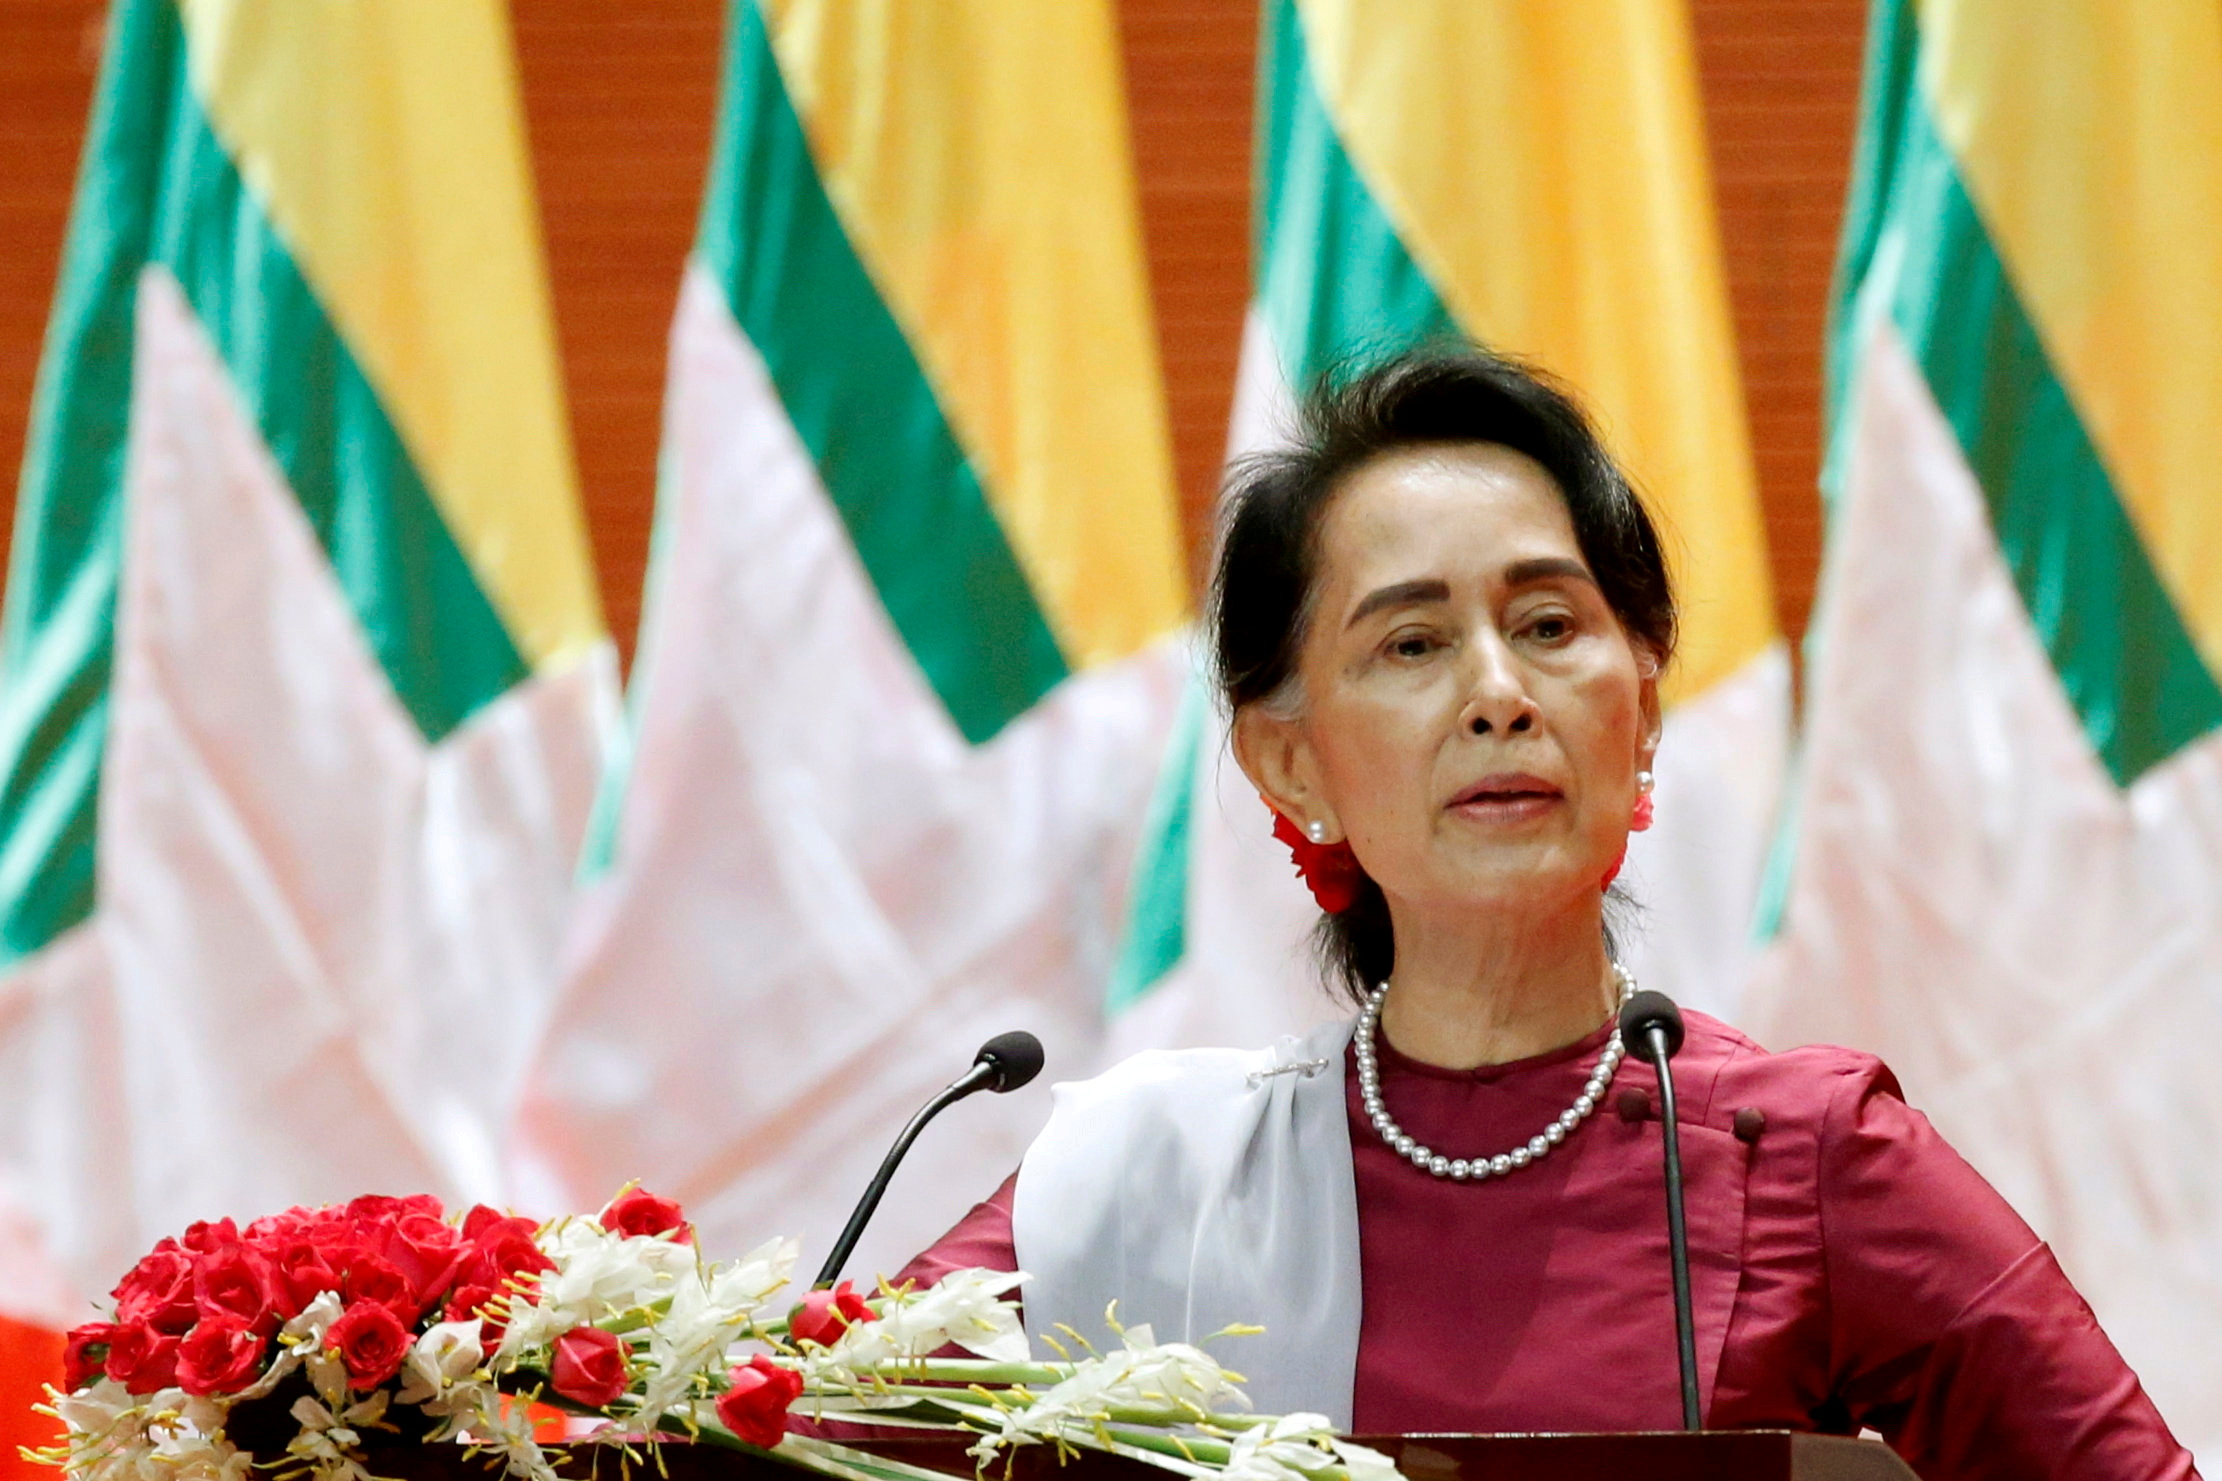 Myanmar State Counselor Aung San Suu Kyi delivers a speech to the nation over Rakhine and Rohingya situation, in Naypyitaw, Myanmar September 19, 2017. REUTERS/Soe Zeya Tun/File Photo